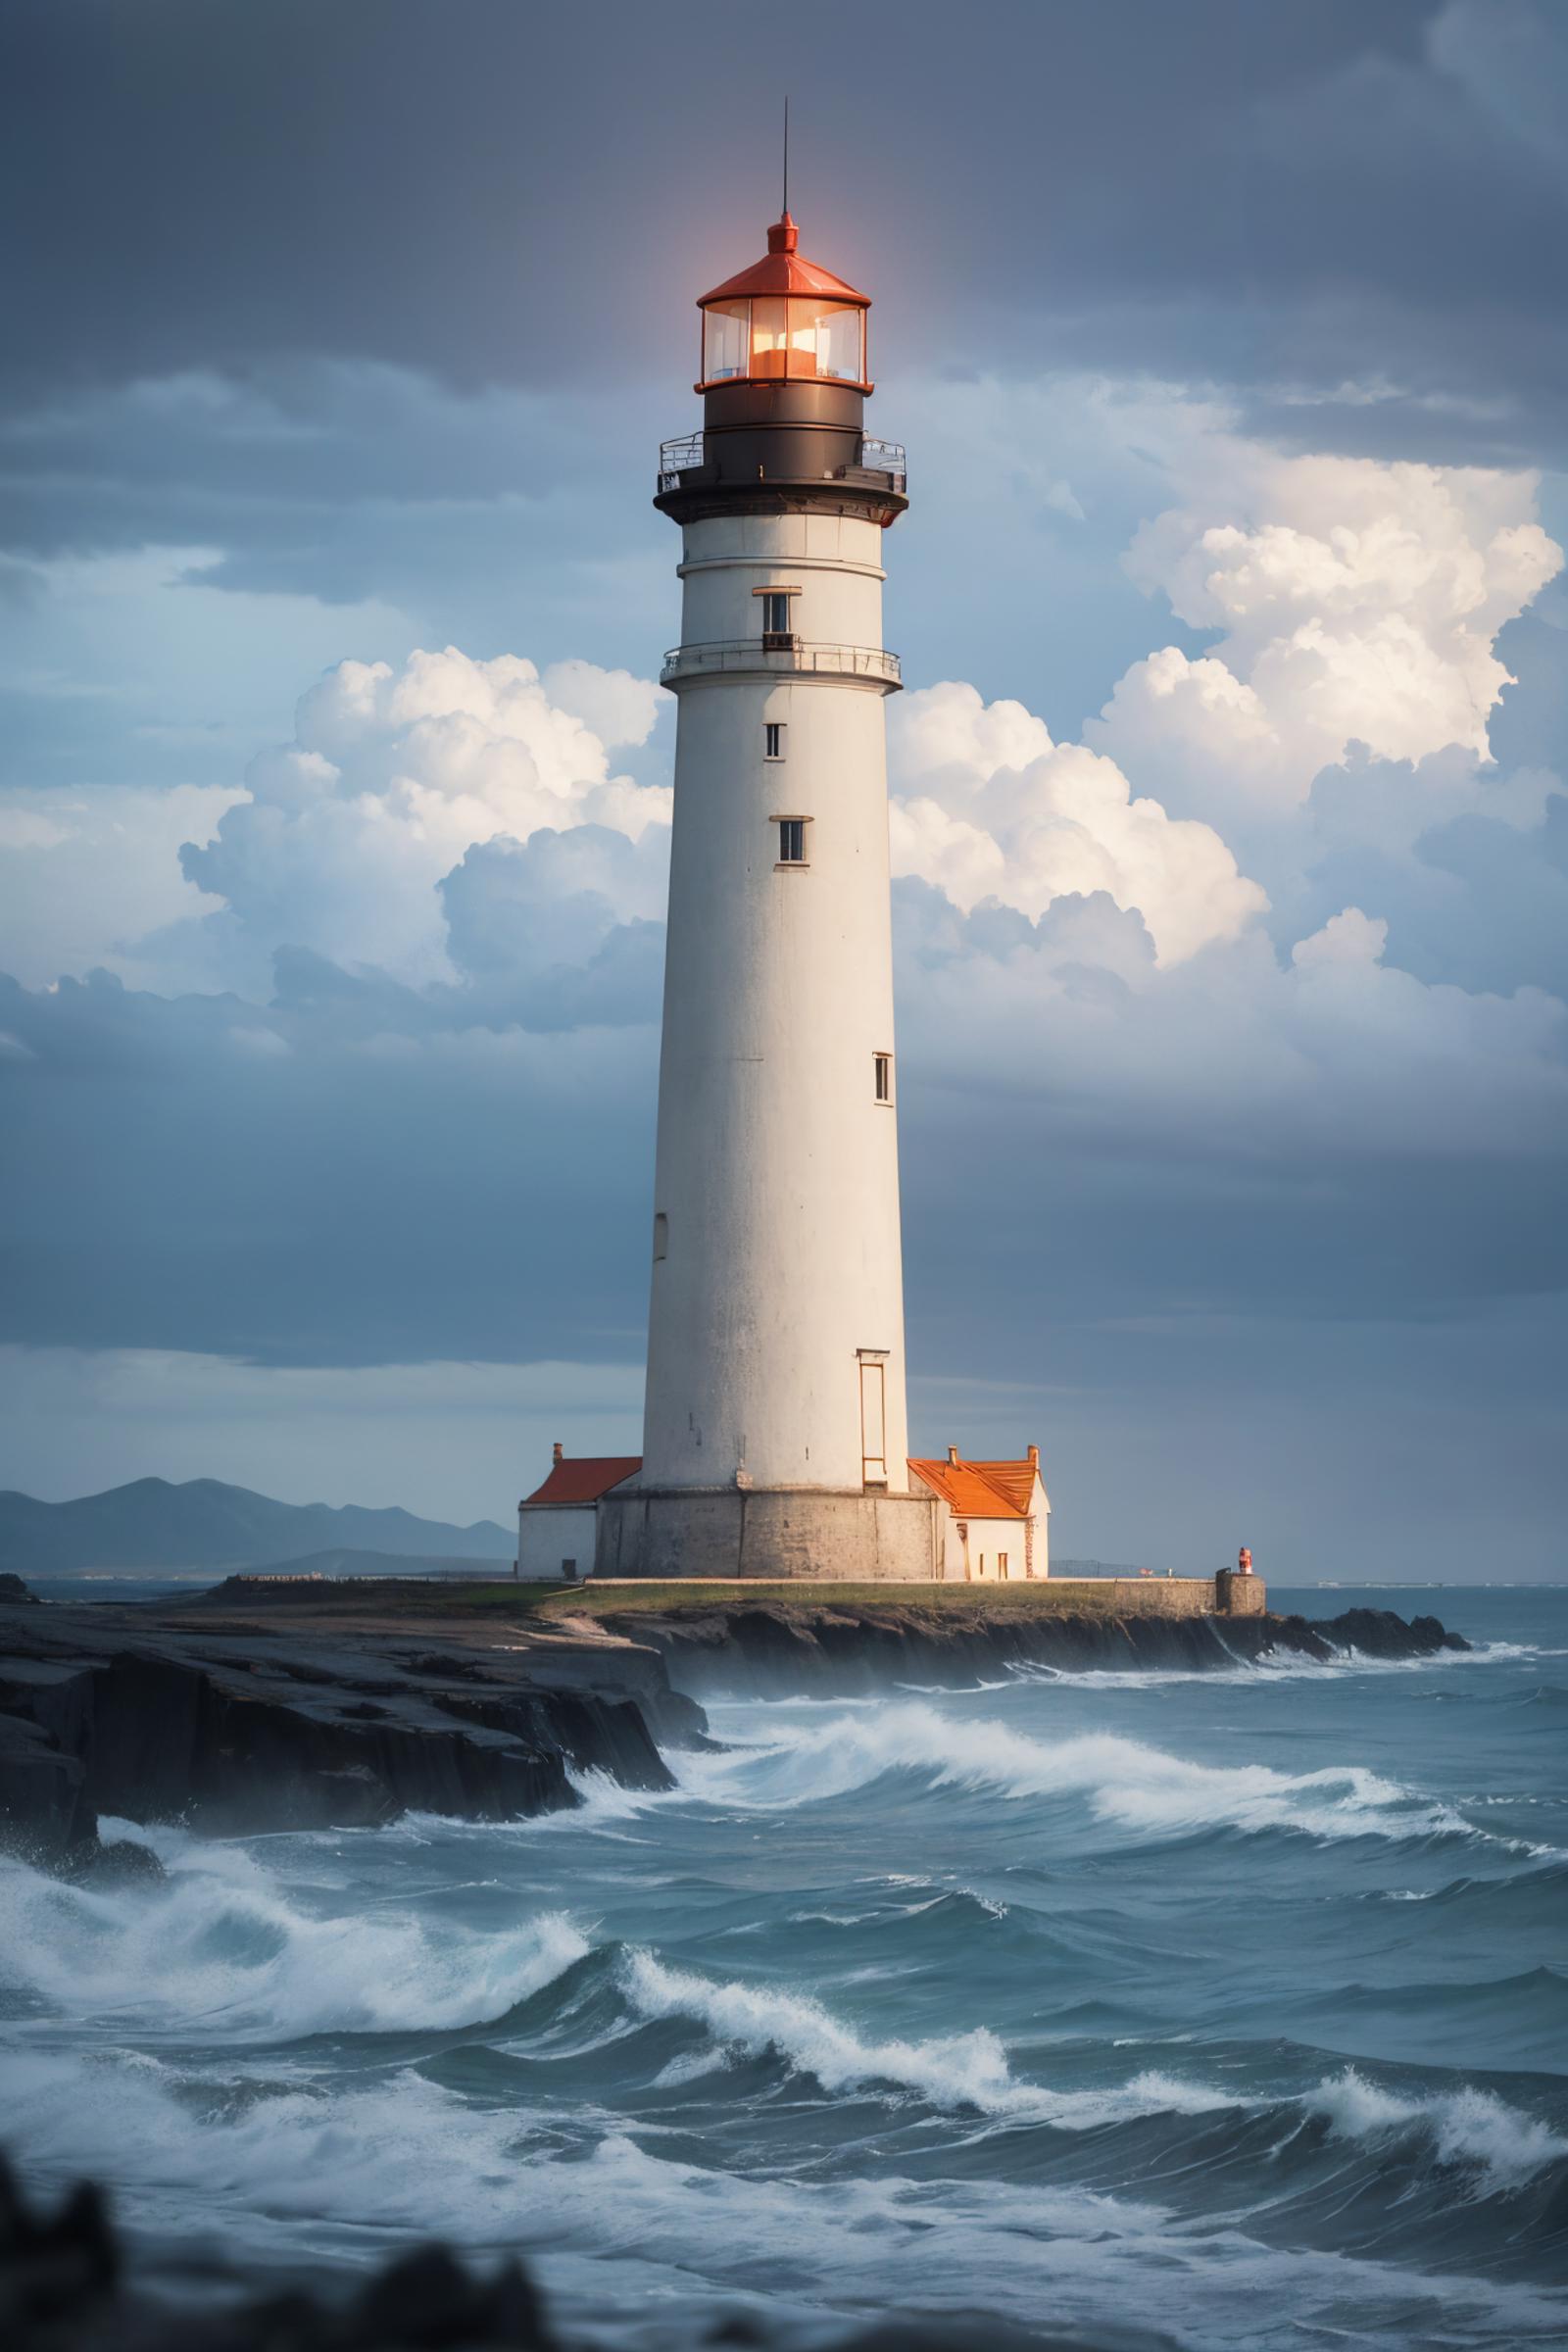 A lighthouse stands tall on the edge of a rocky cliff, surrounded by a body of water.